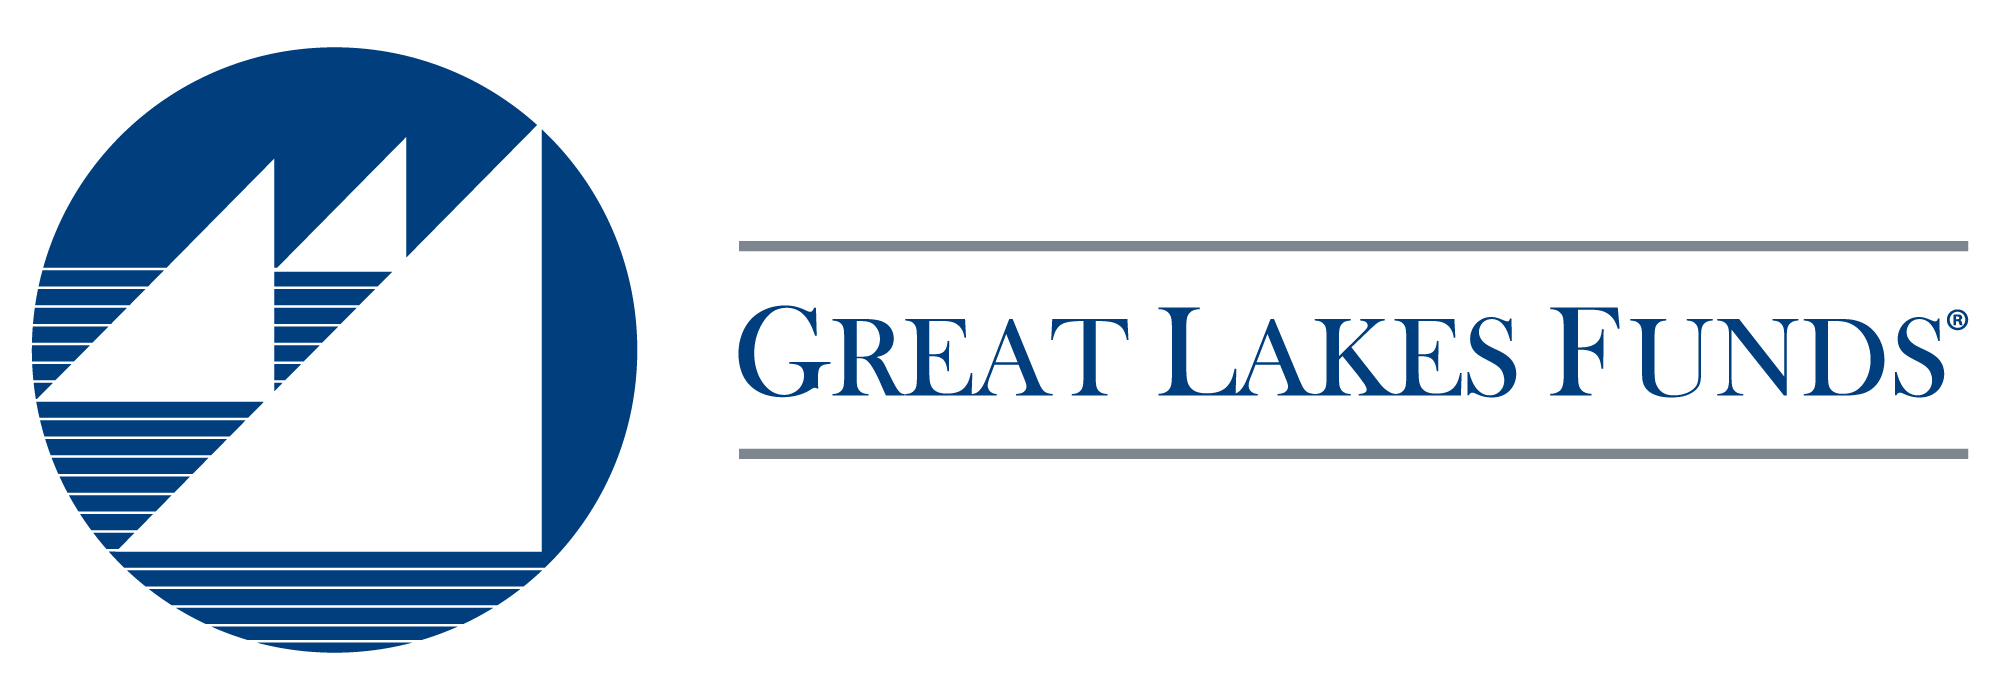 Great Lakes Funds